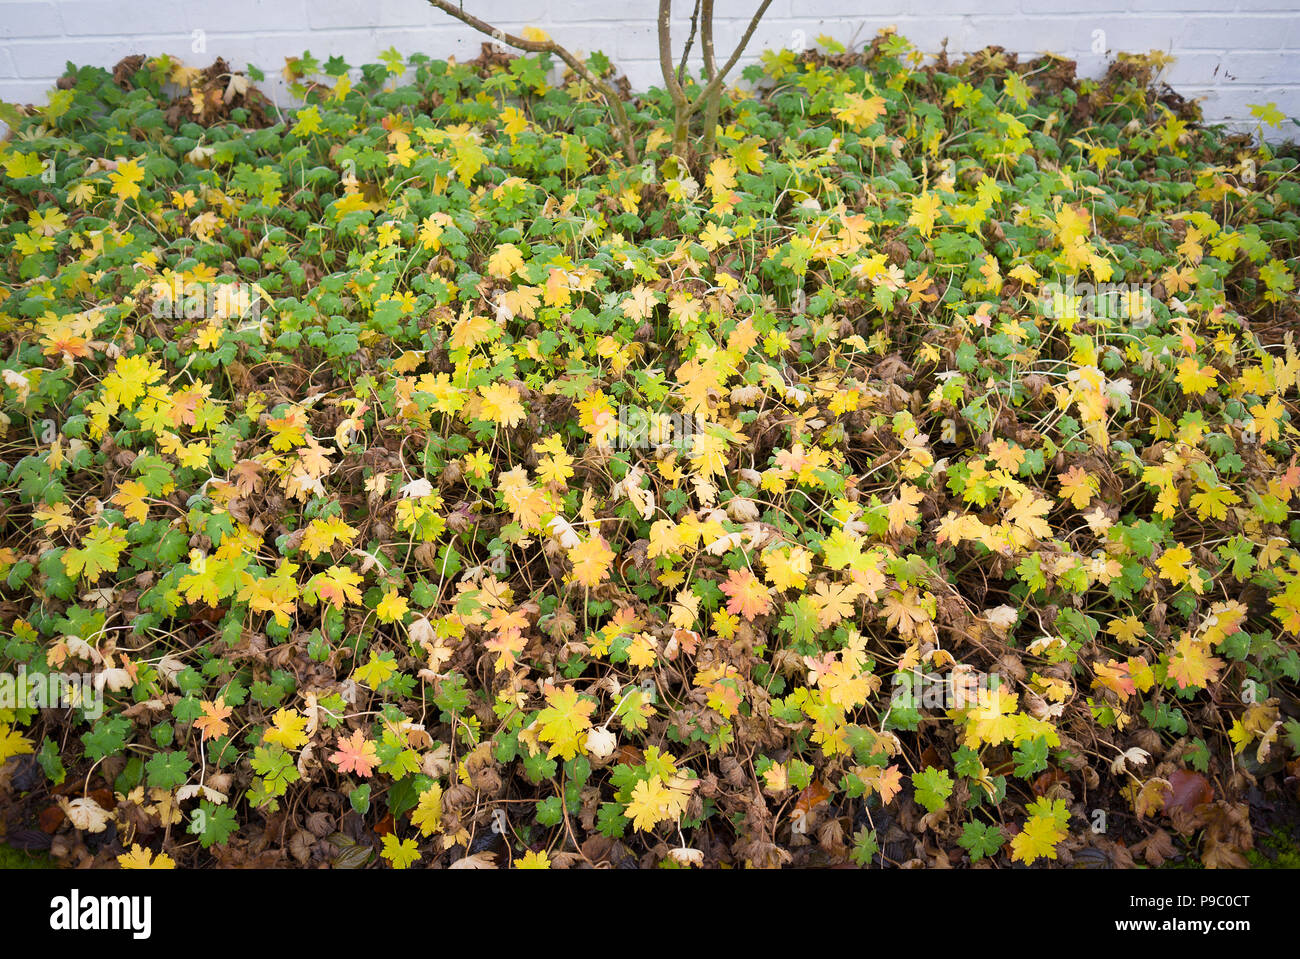 A bed of hardy geraniums in a mild winter in UK showing foliage in different stages of growth and decline Stock Photo